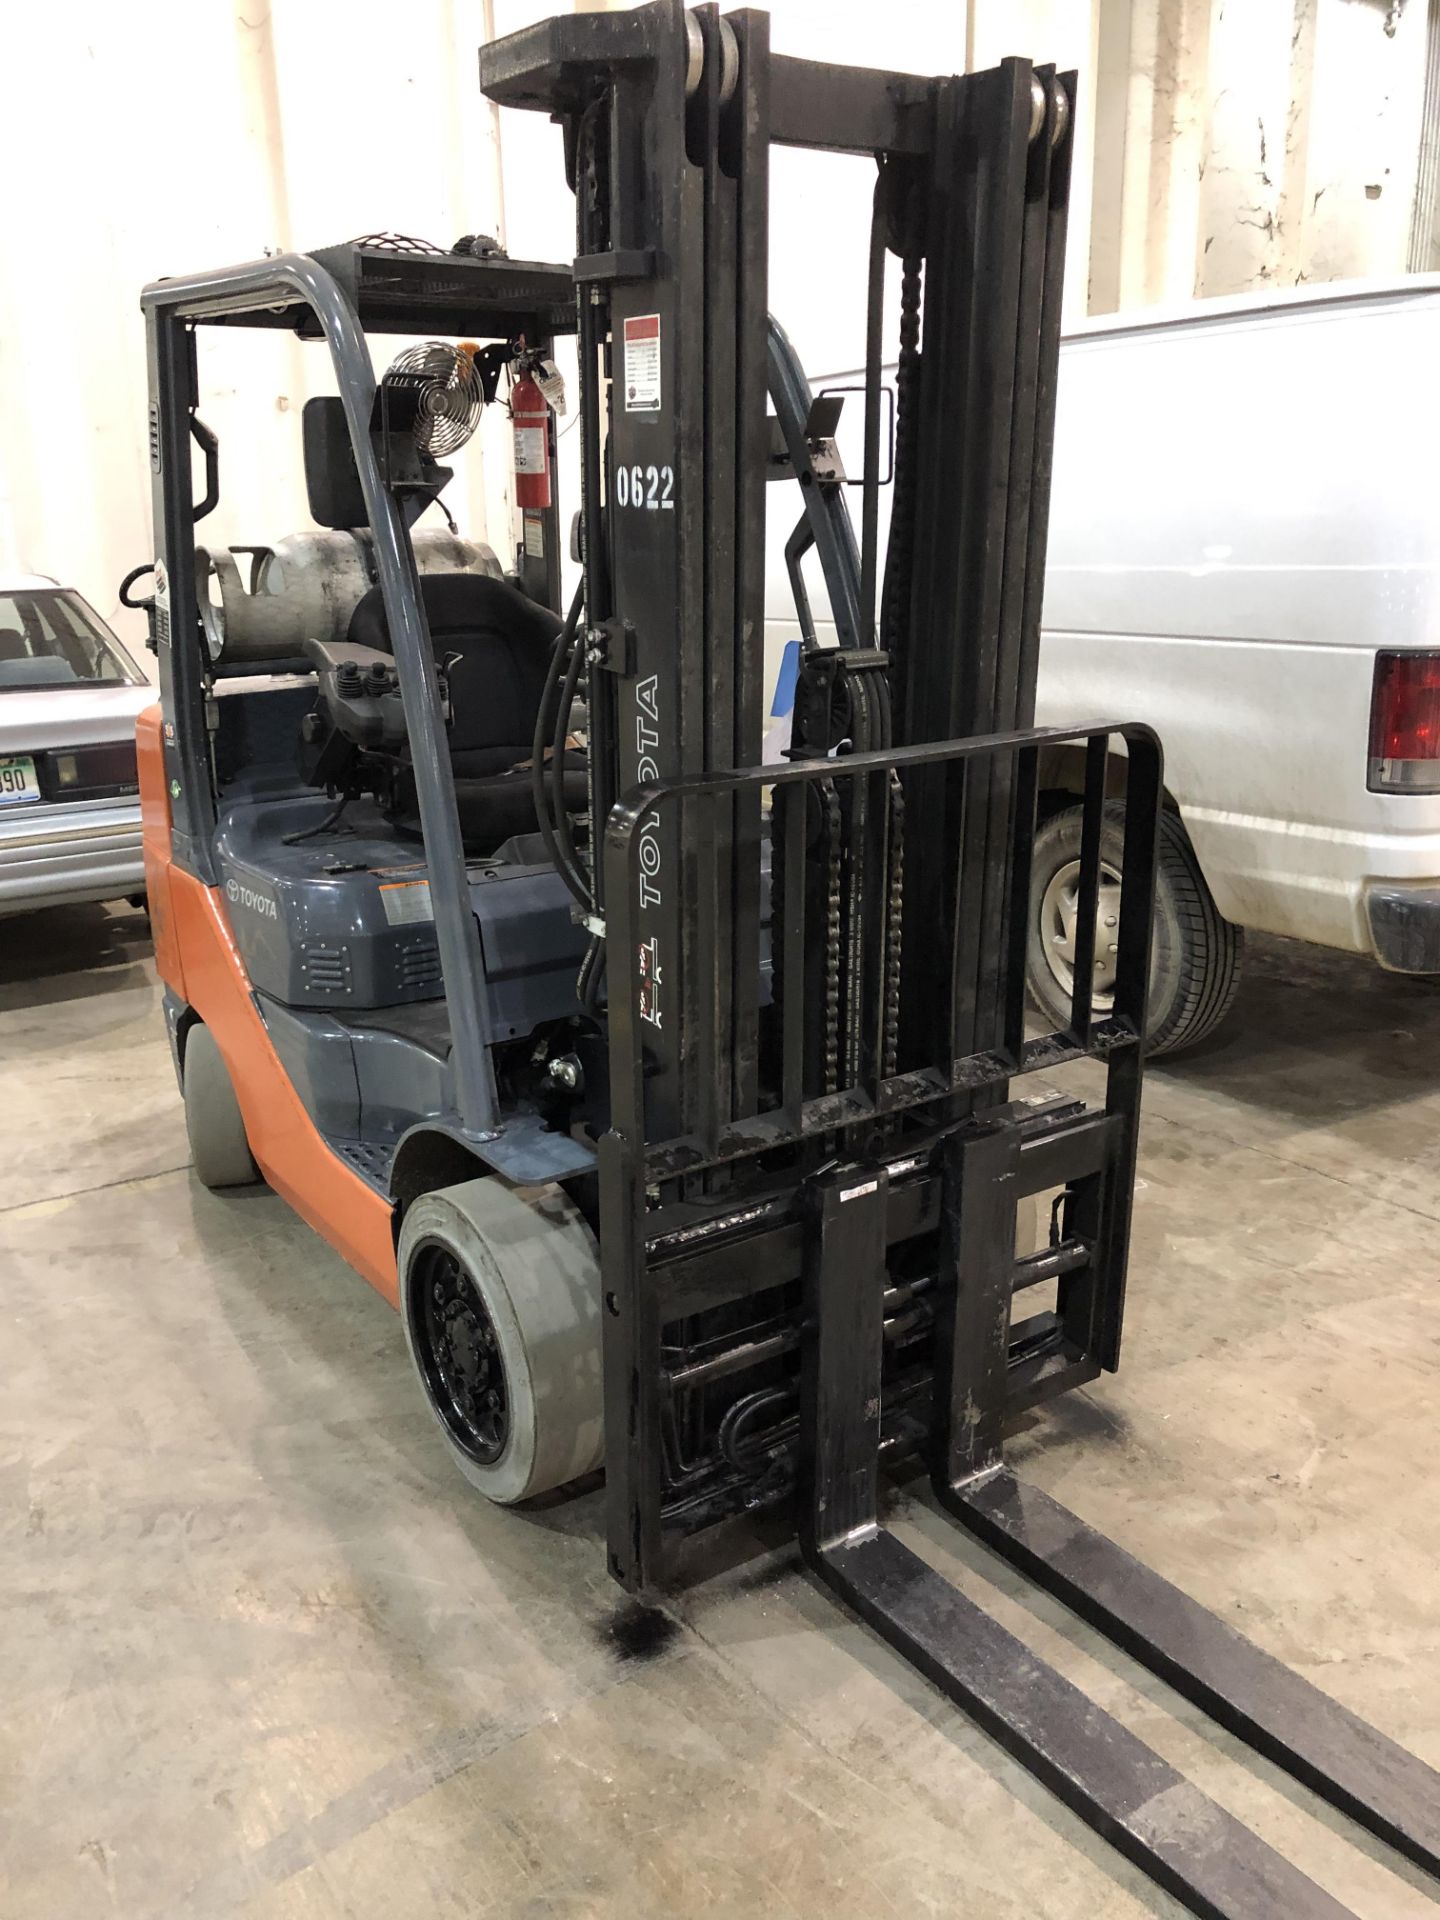 6,000 LB TOYOTA MODEL 8FG2430 LP GAS LIFT TRUCK; S/N 65009, 3-STAGE MAST, 187" LIFT HEIGHT, 87" MAST - Image 2 of 12